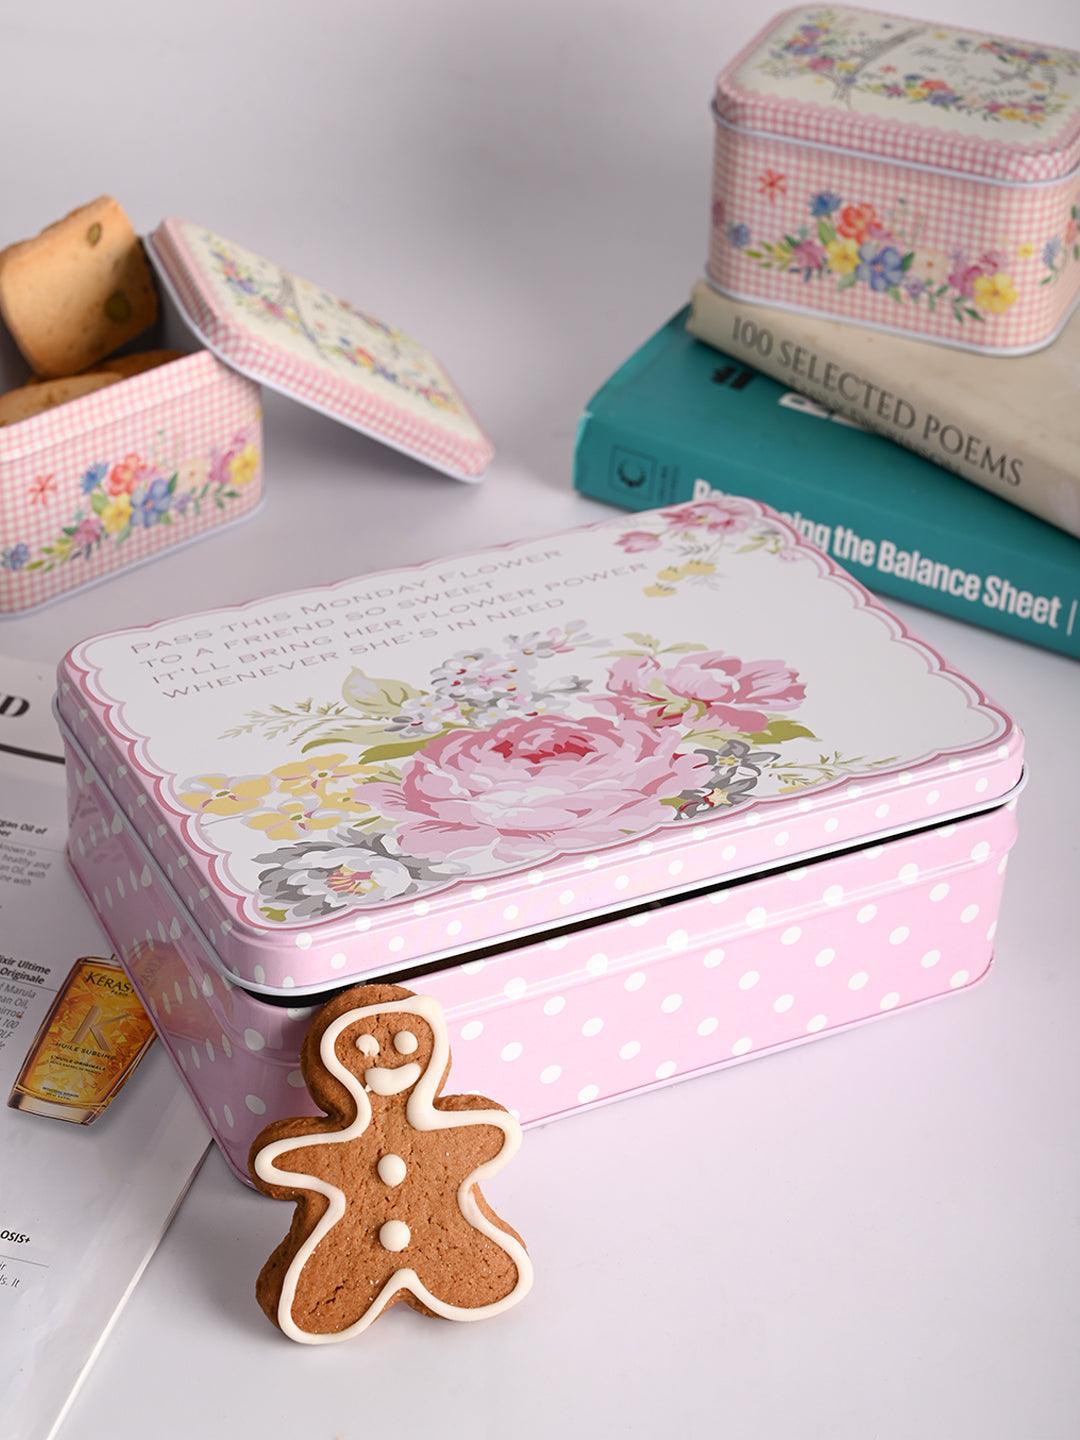 Floral Tin Storage Box Container - Set Of 6, Yellow & Pink - MARKET99